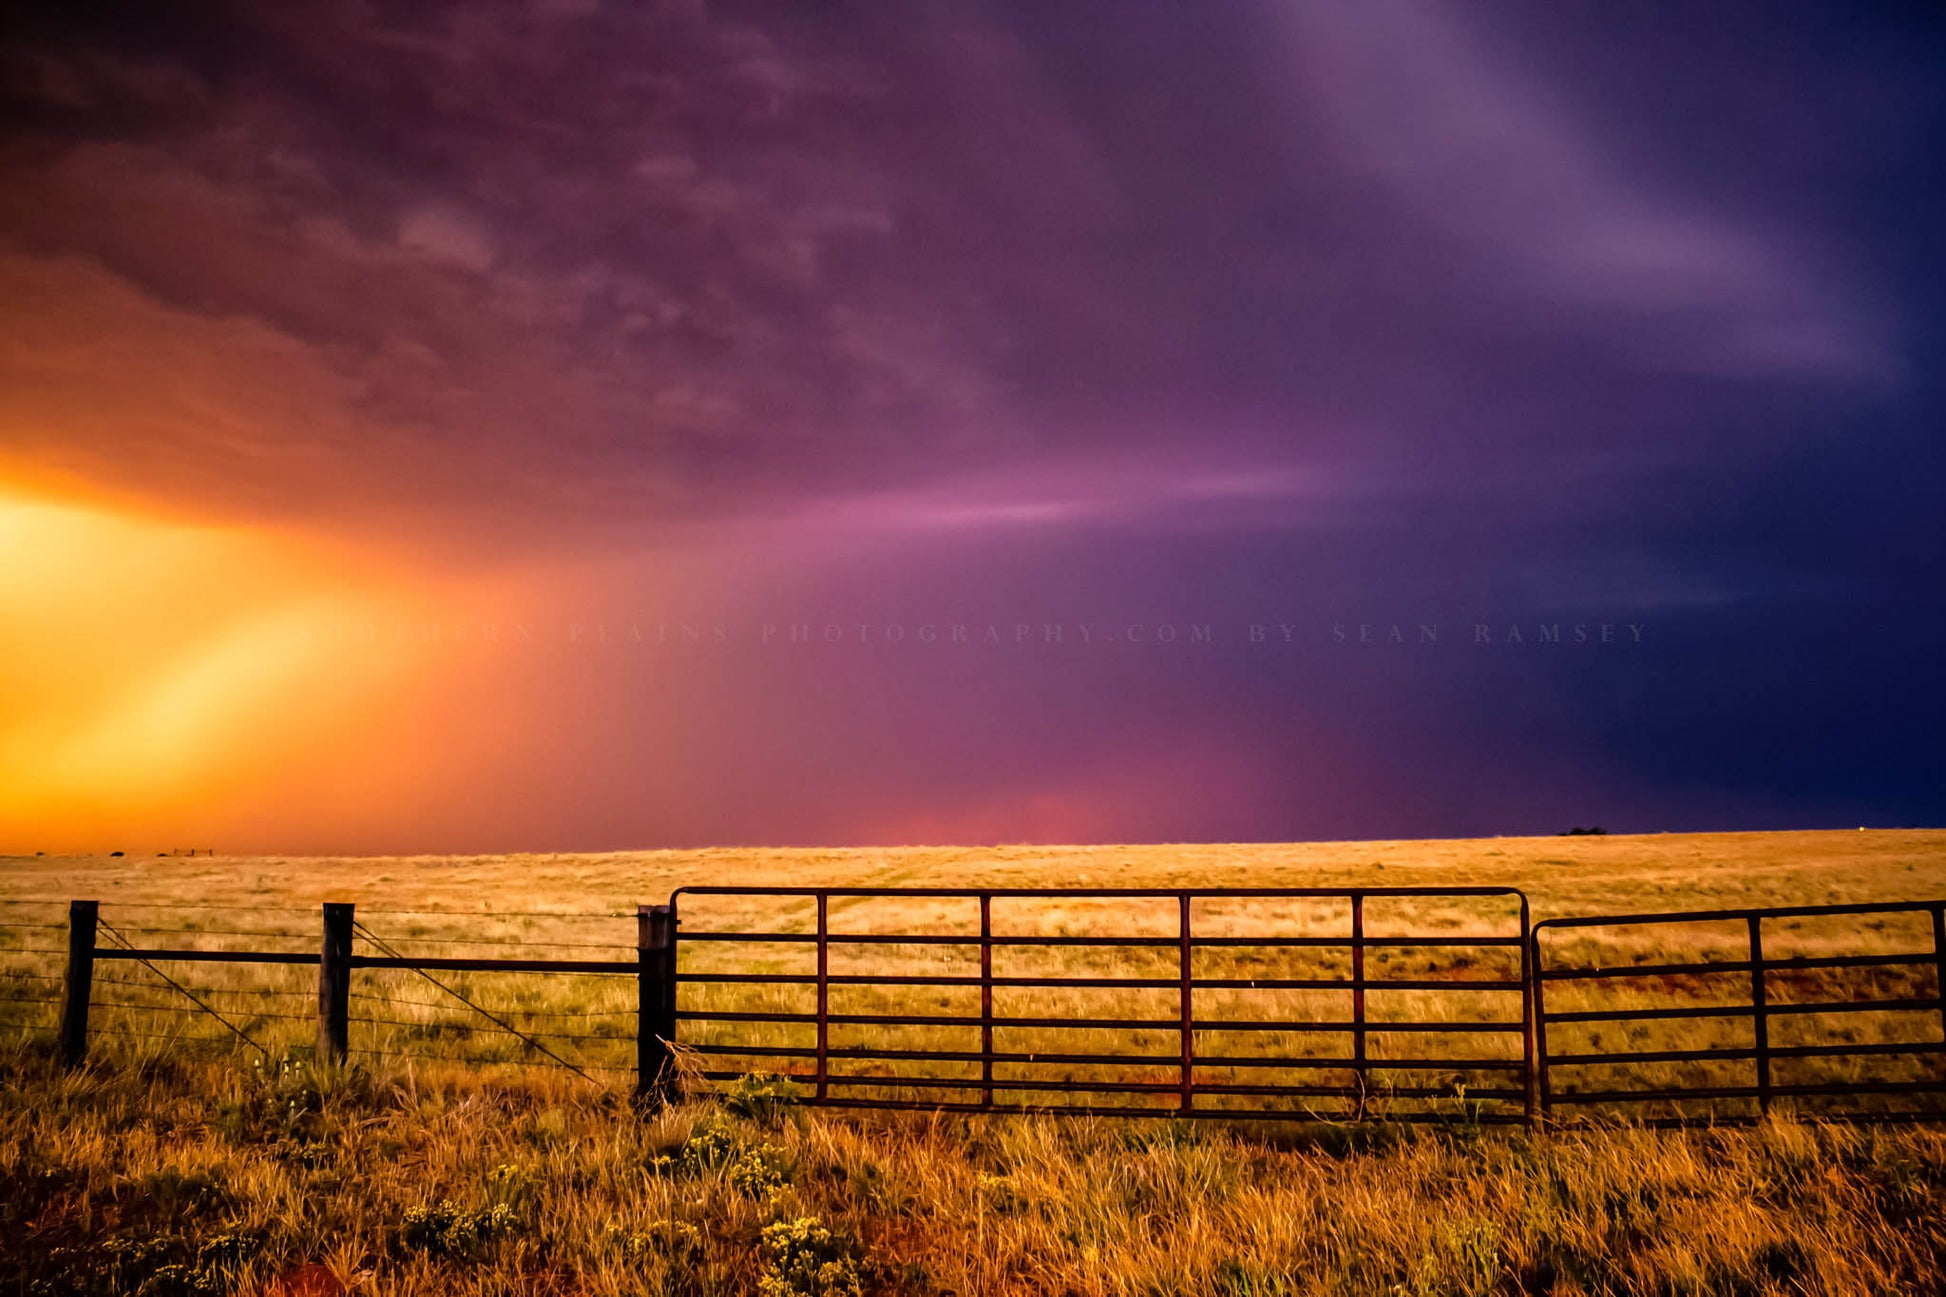 Country photography print of a colorful sky over a fence gate on a stormy day in western Oklahoma by Sean Ramsey of Southern Plains Photography.